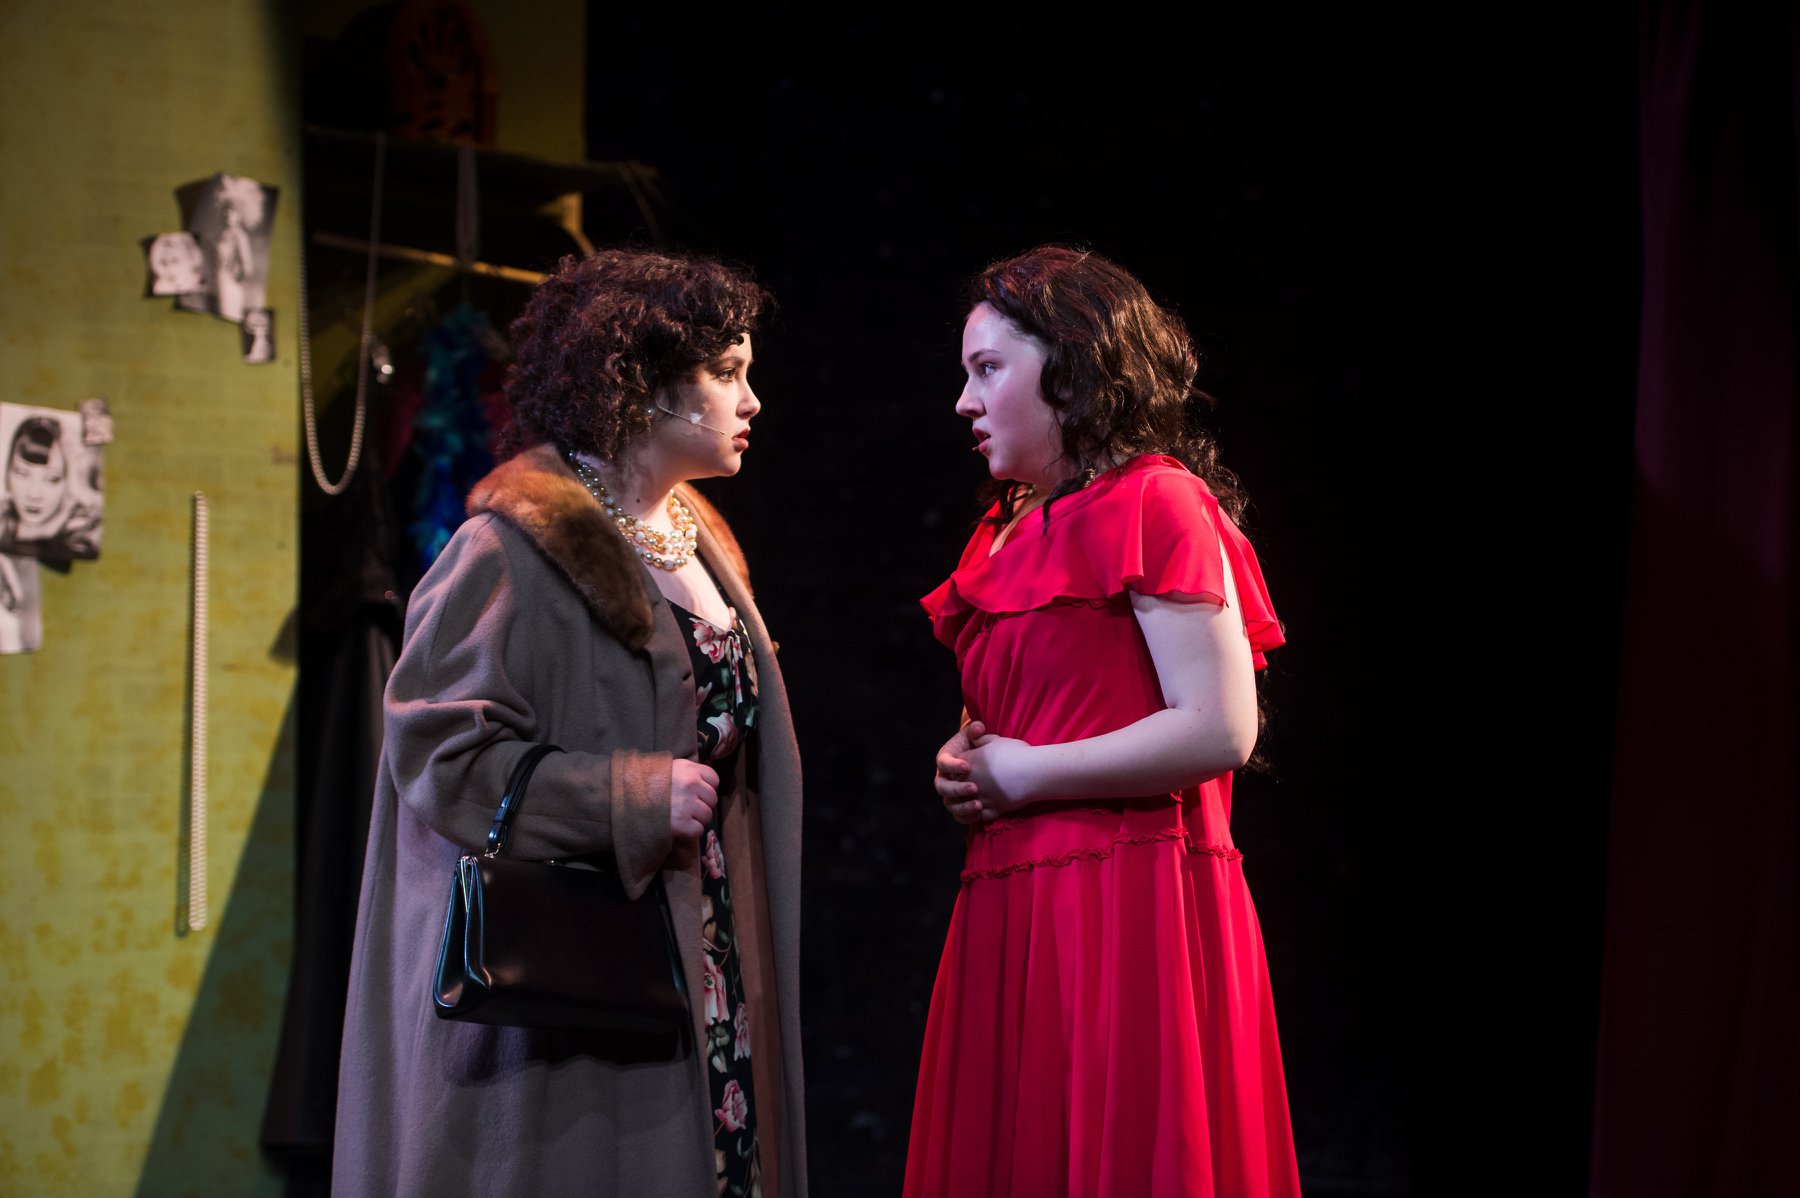 Chloe Friedman and Meghan Carey in Gypsy, A Musical Fable. Photo by Lock & Company.